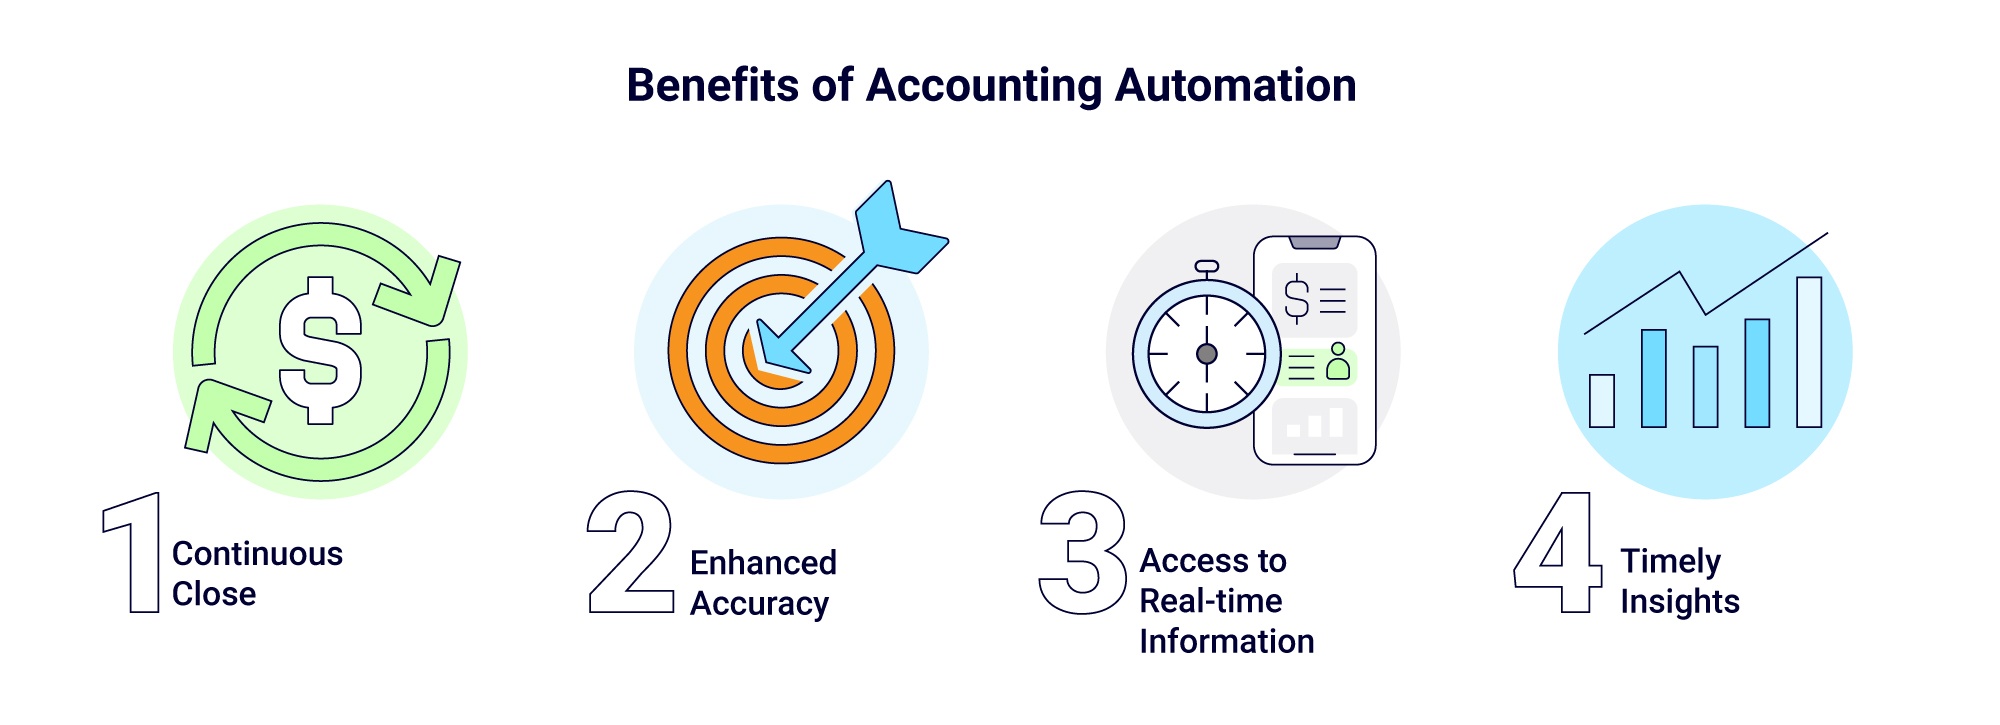 Benefits of Accounting Automation